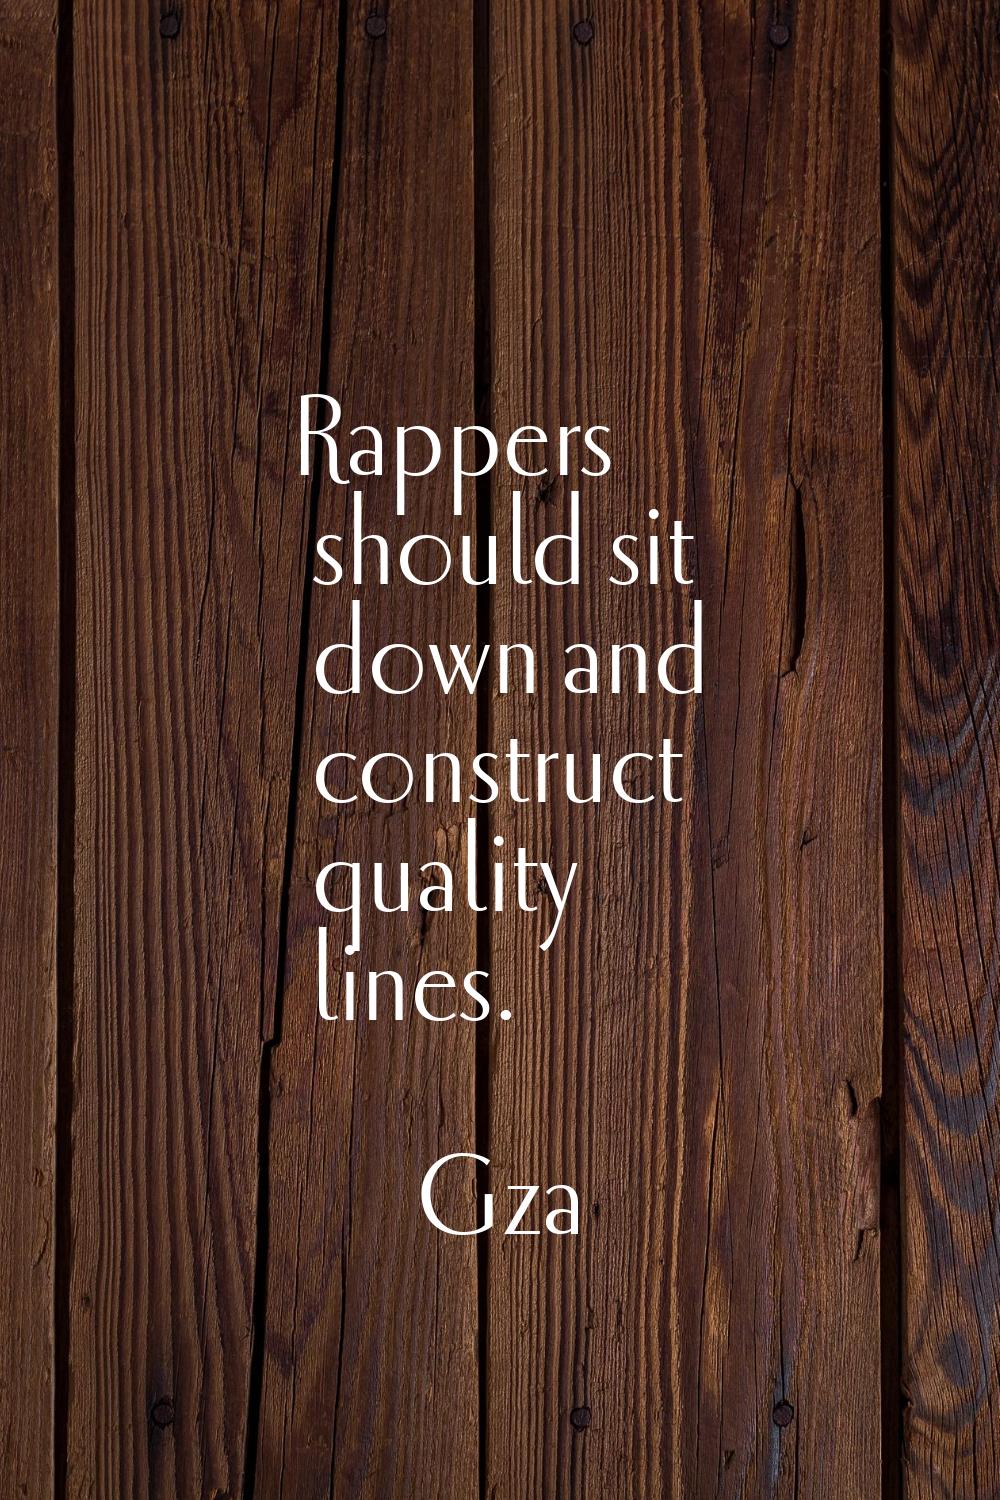 Rappers should sit down and construct quality lines.